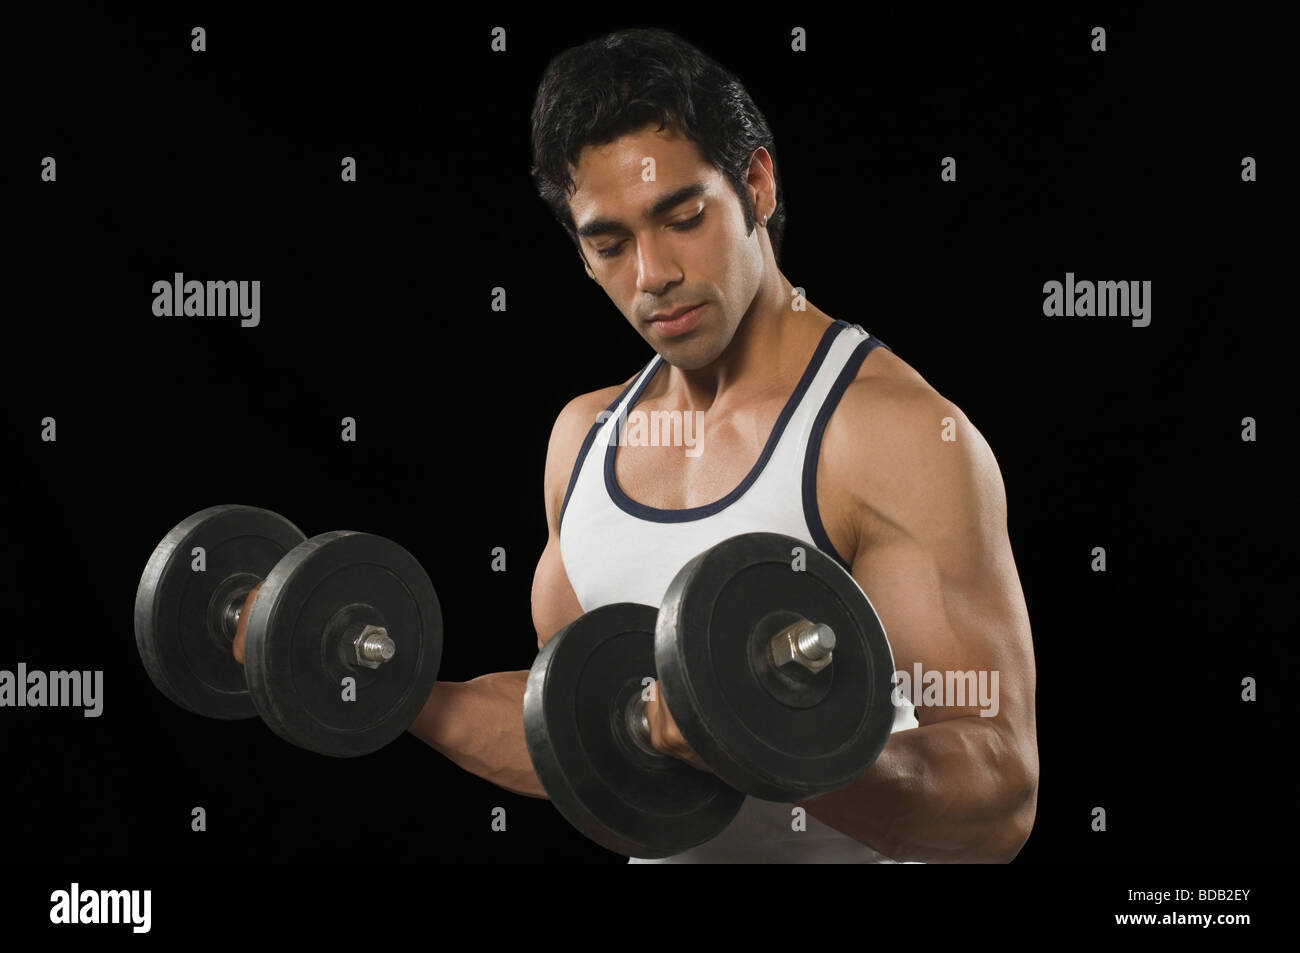 Man exercising with dumbbells Stock Photo